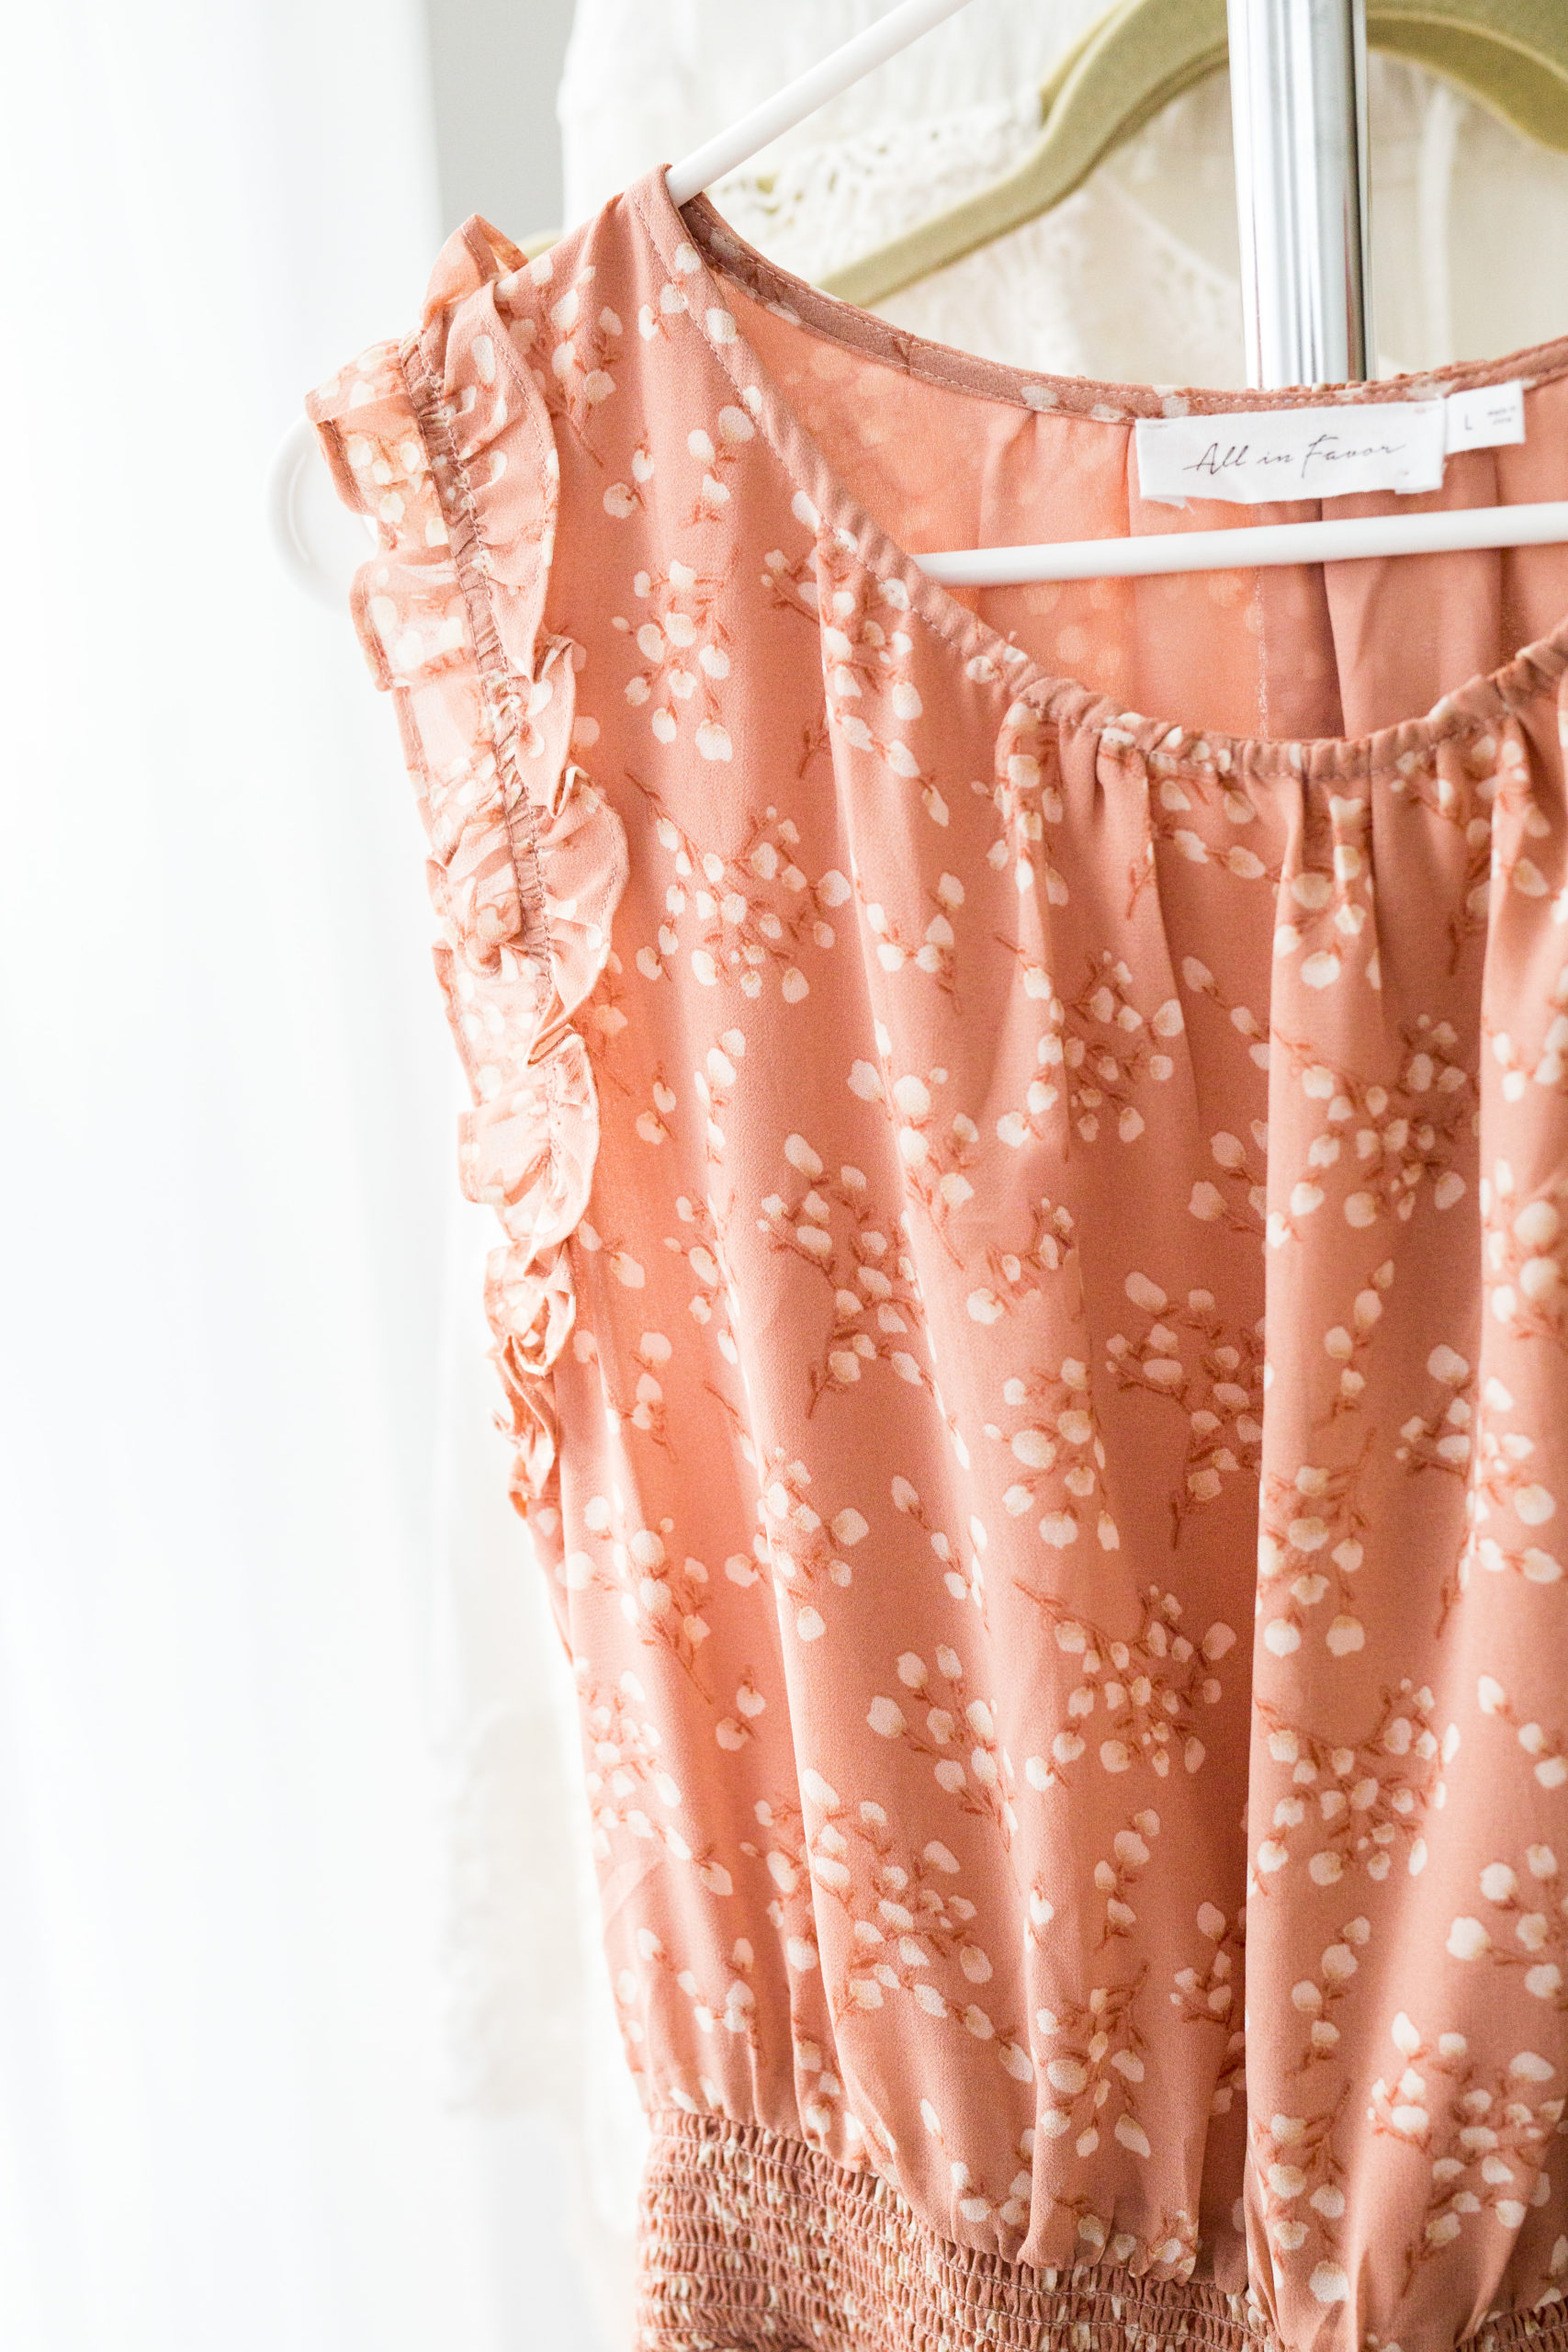 peach colored pretty dress with ruffles at shoulders.